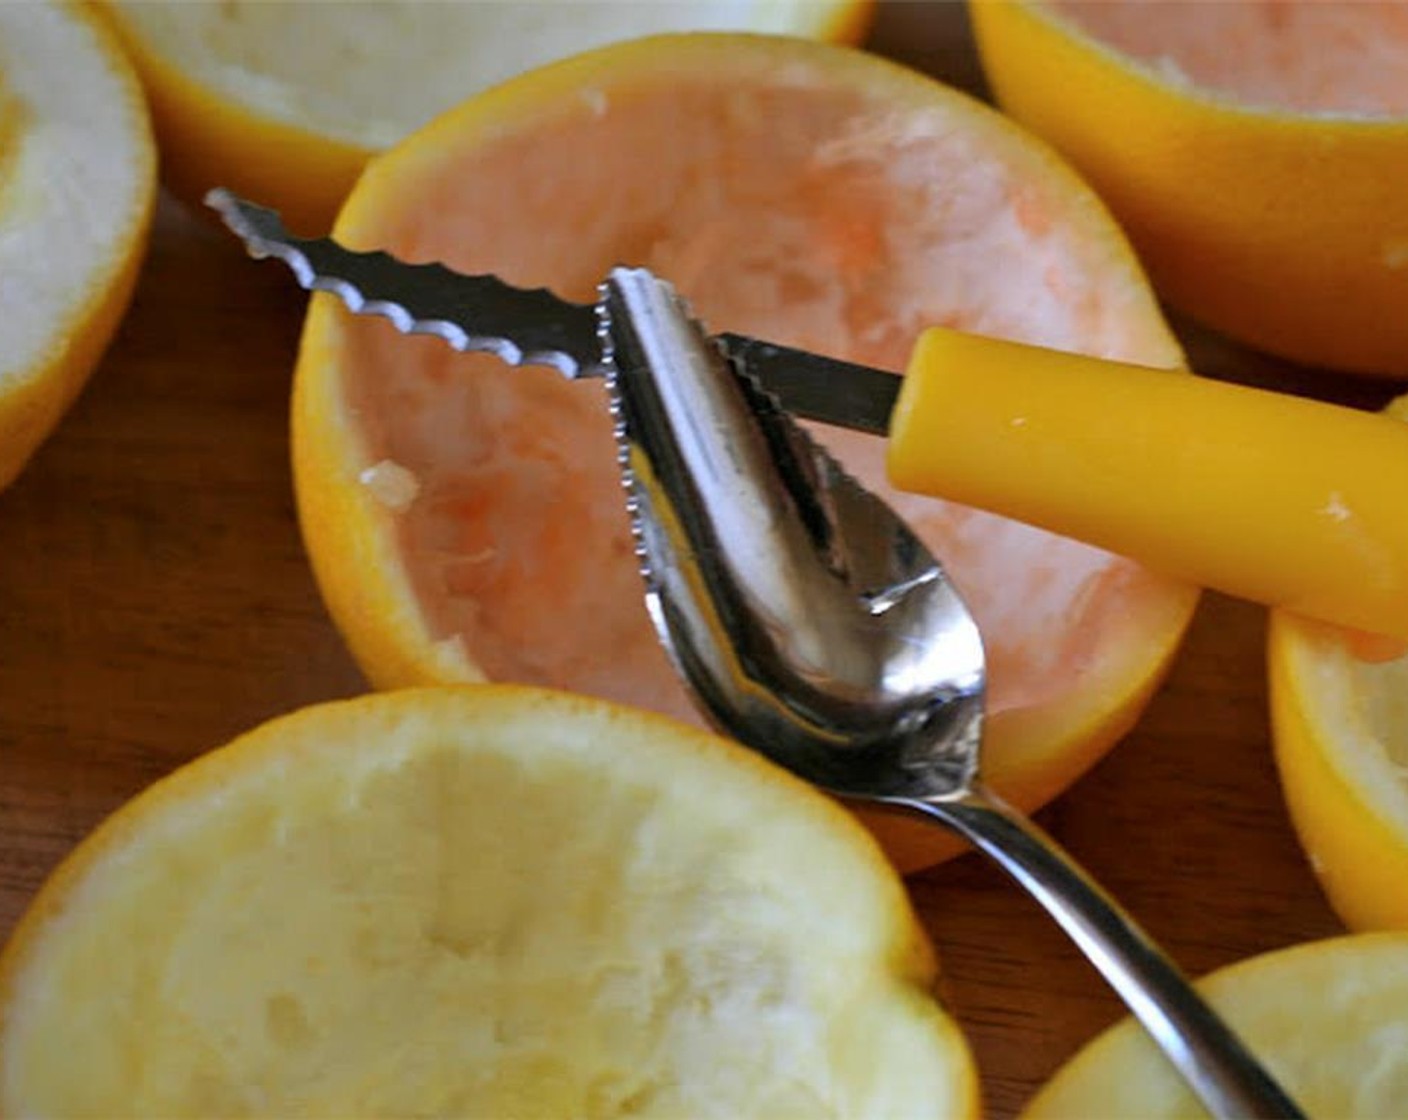 step 2 Remove pulp by using a grapefruit knife and spoon. Make sure not to poke any holes in the peel. You will probably only need about 6 grapefruit halves.